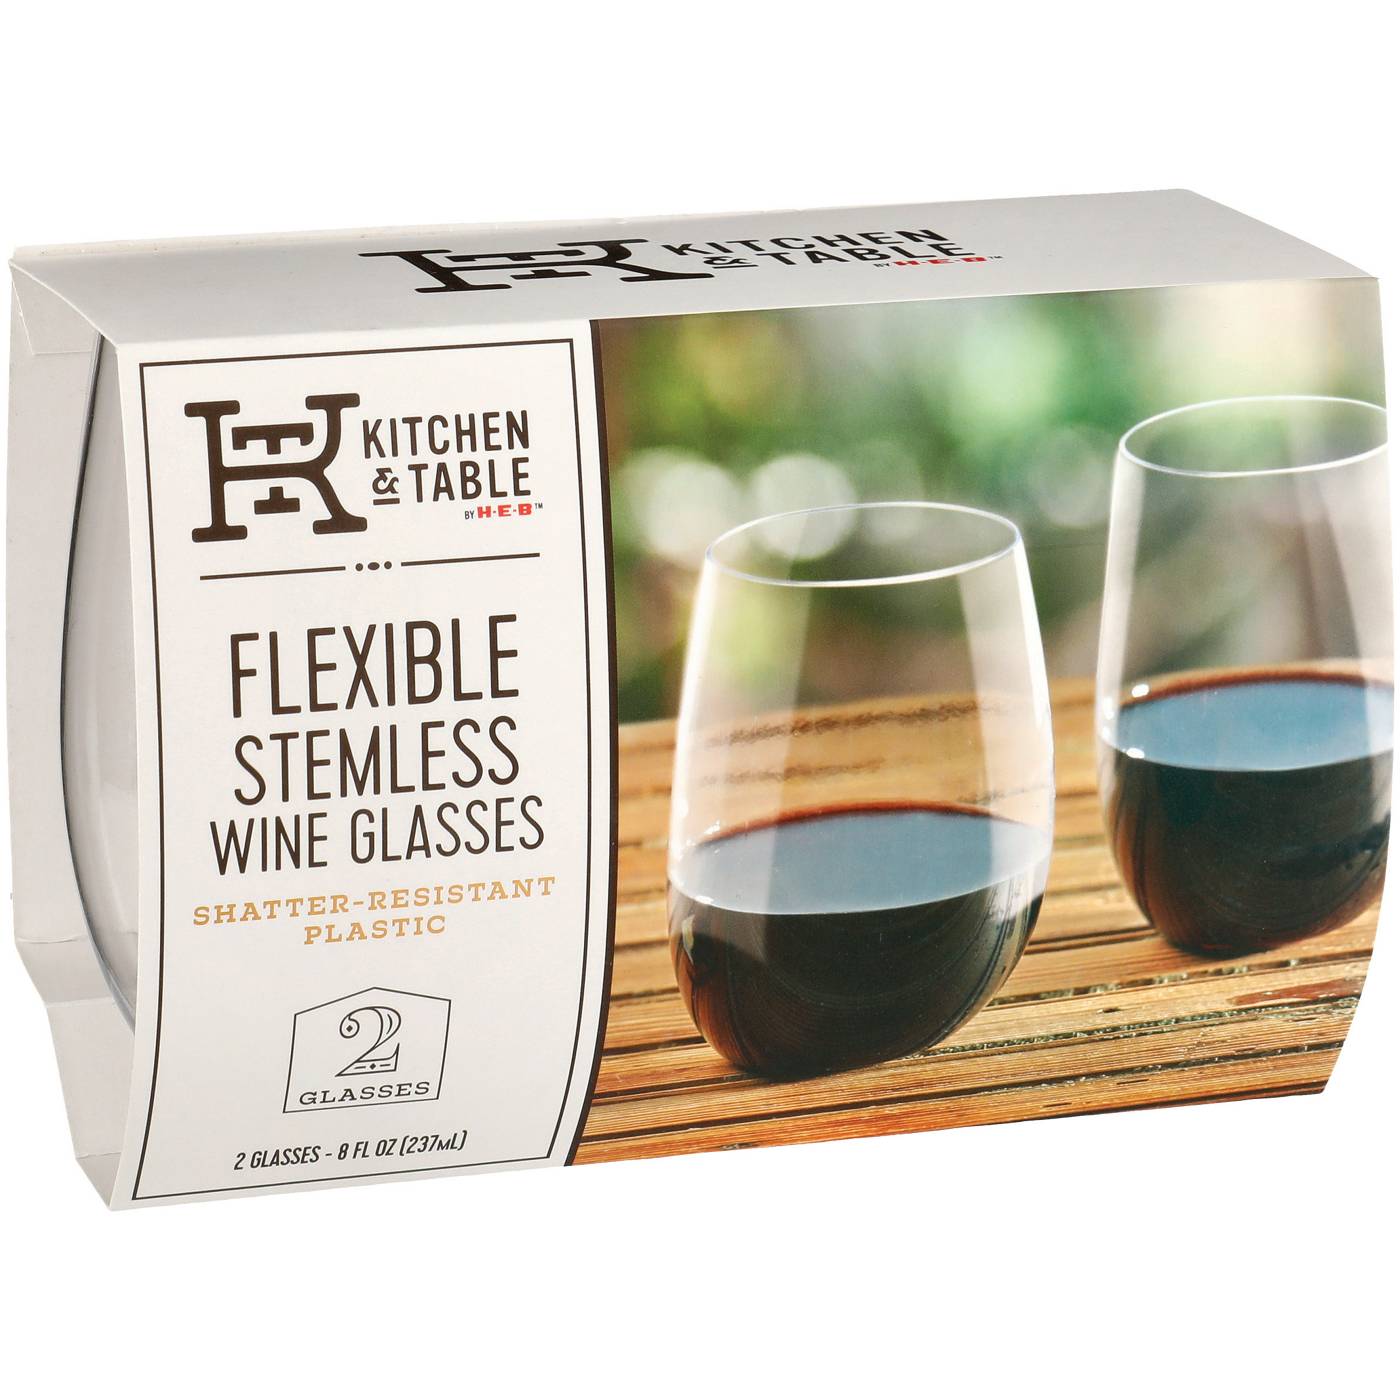 Kitchen & Table by H-E-B 2 Flexible Stemless Wine Glasses; image 1 of 2